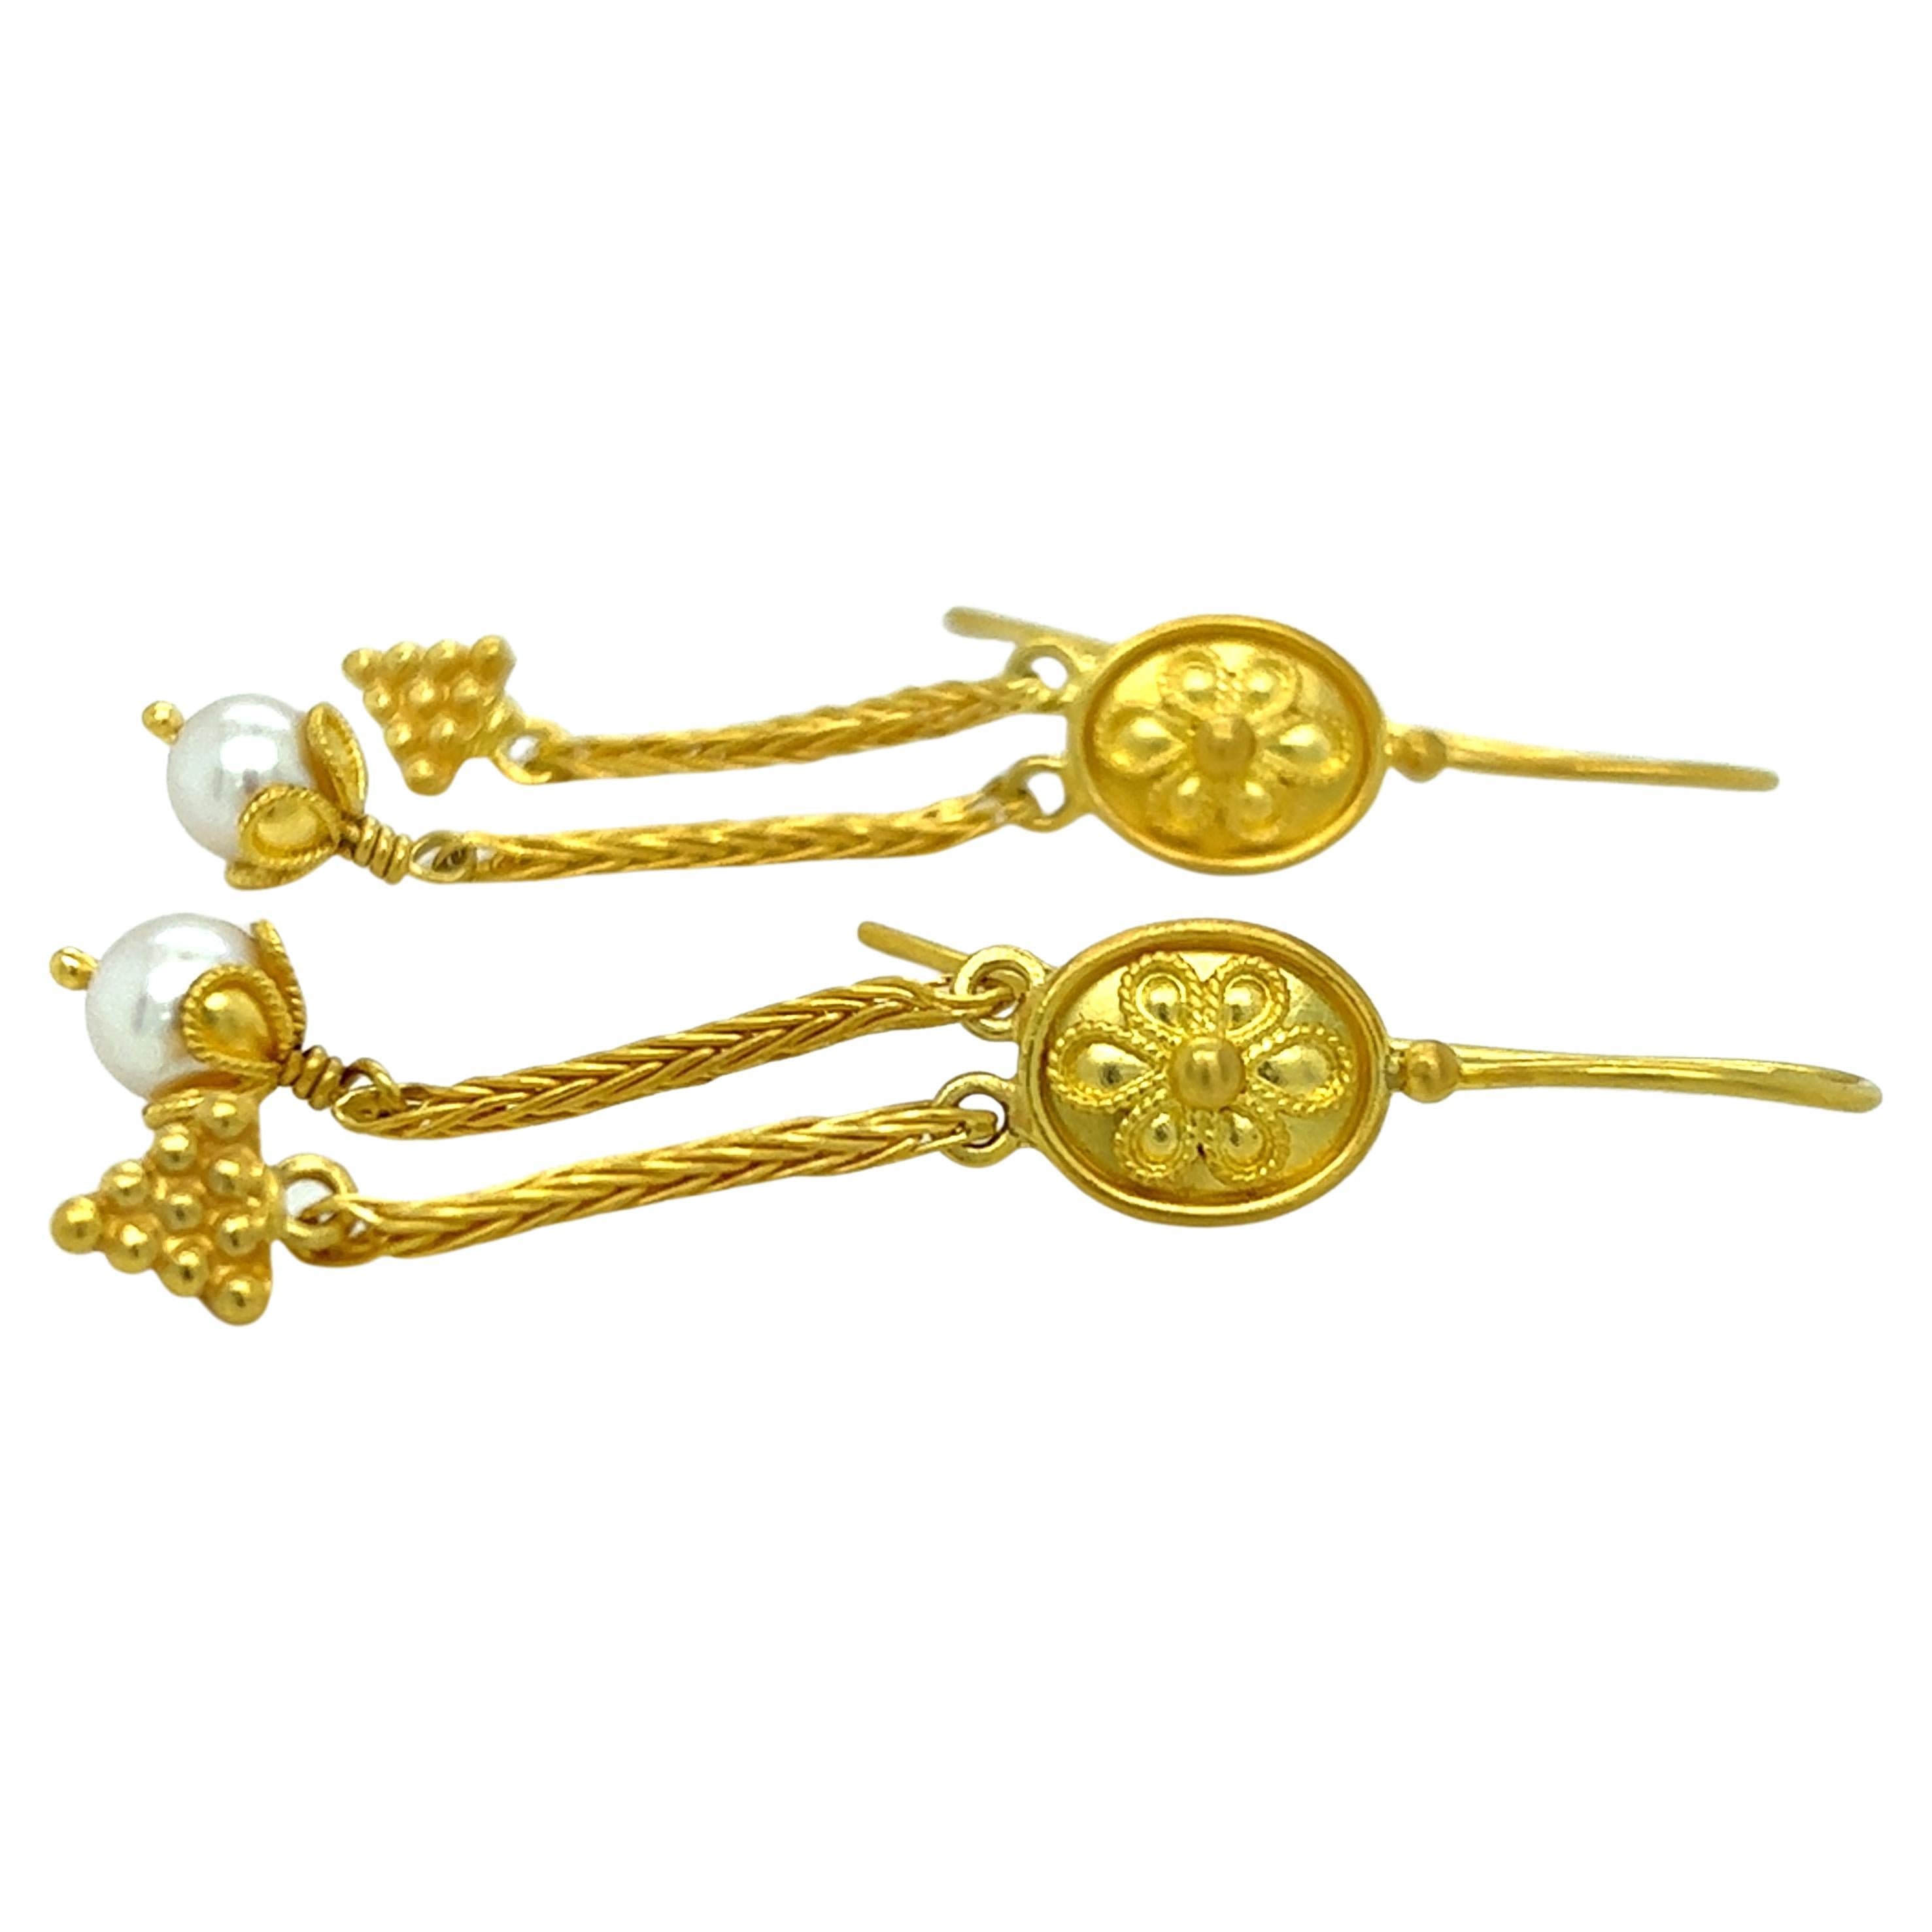 
One pair of 22-karat yellow gold ancient Greek revival design earrings, each set with one freshwater pearl, measuring 2.25 inches long complete with traditional hook closures.